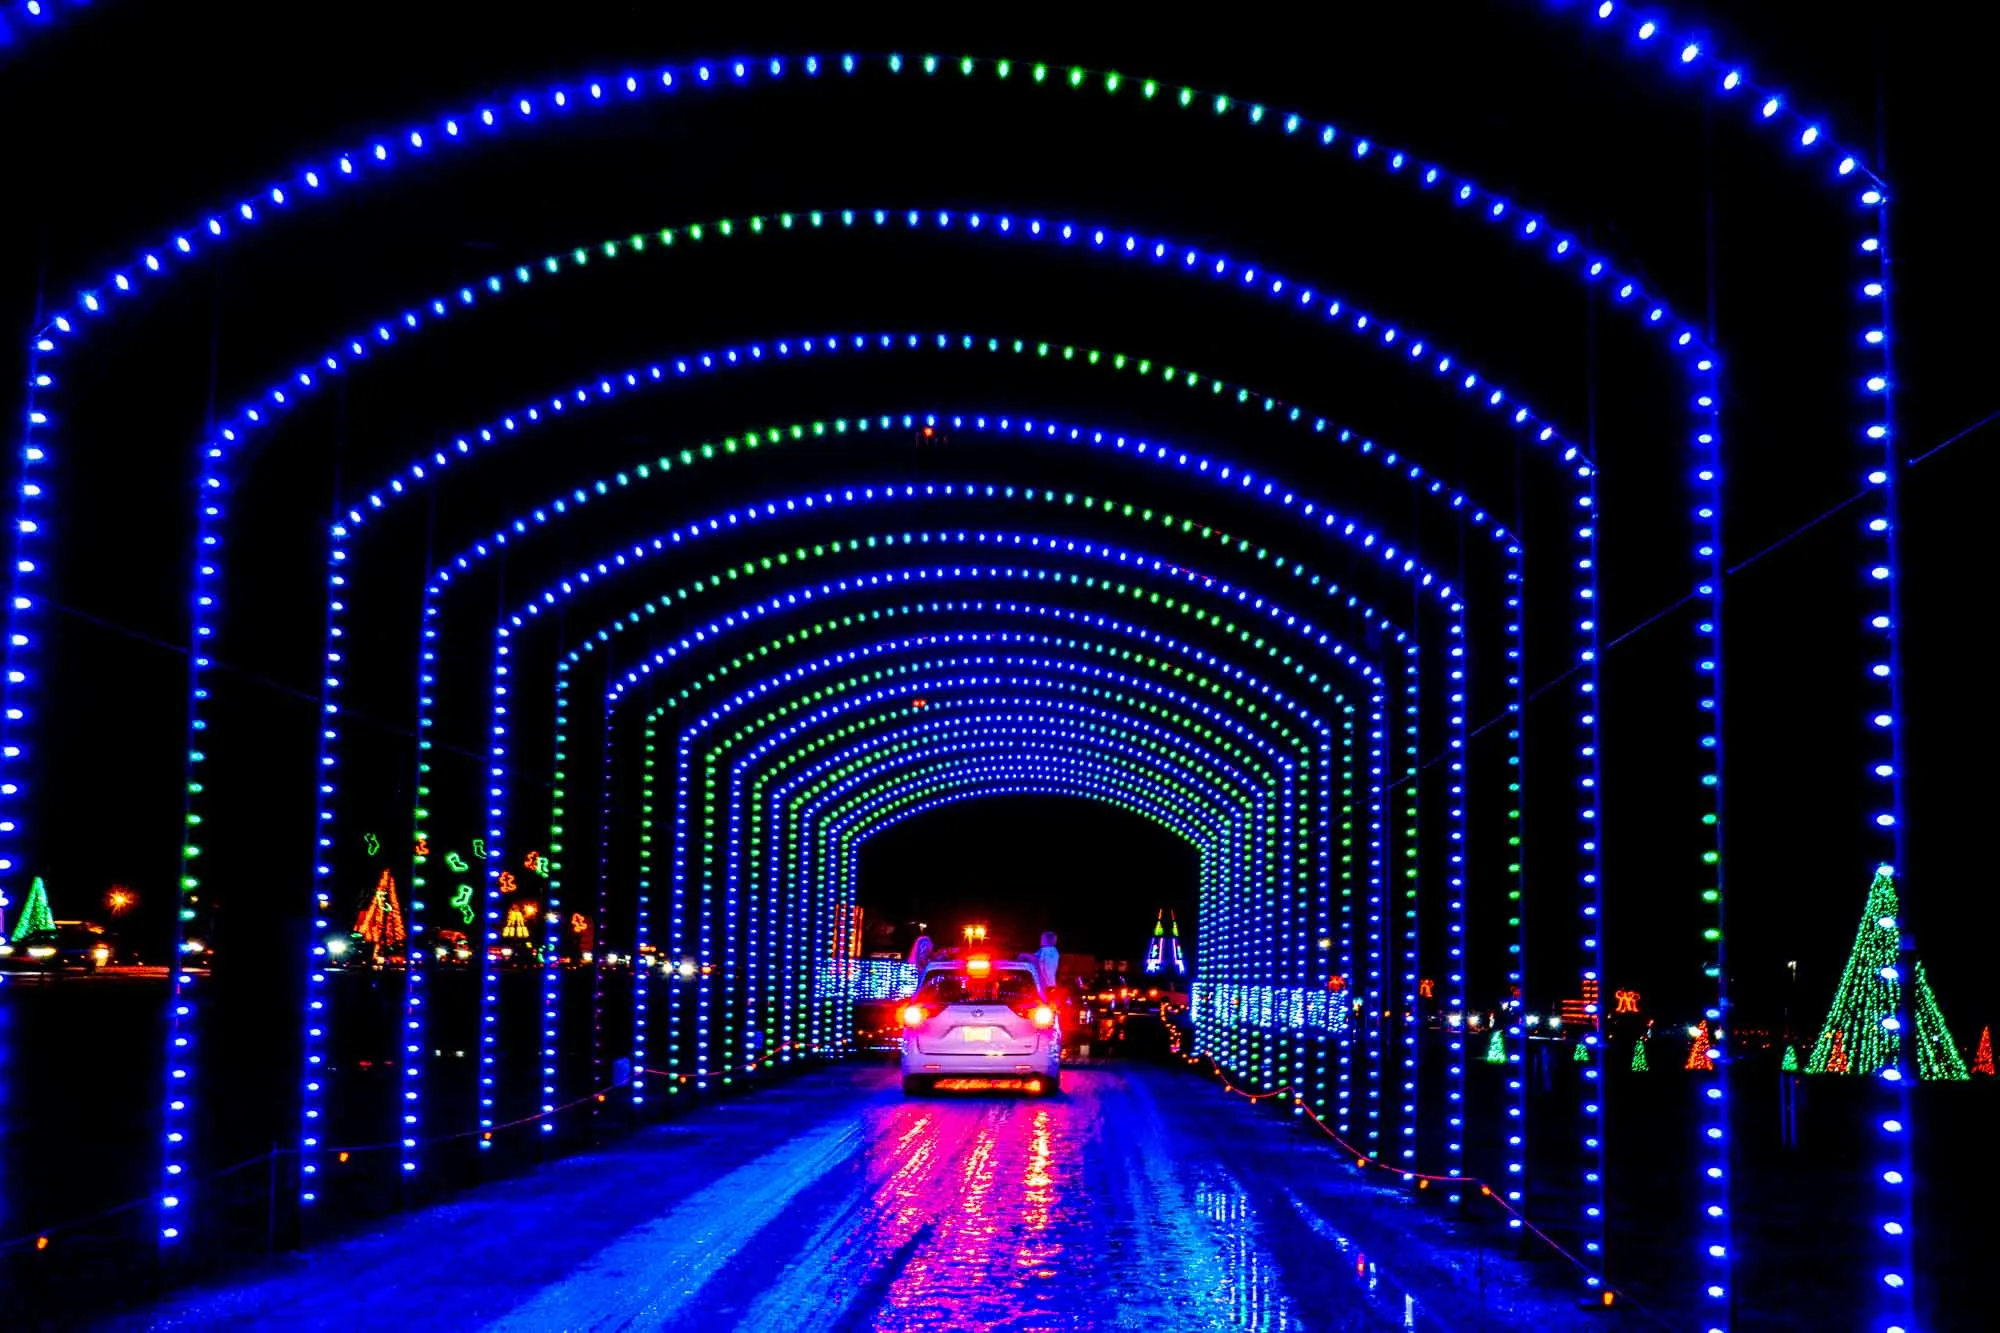 Car driving through a tunnel of Christmas lights